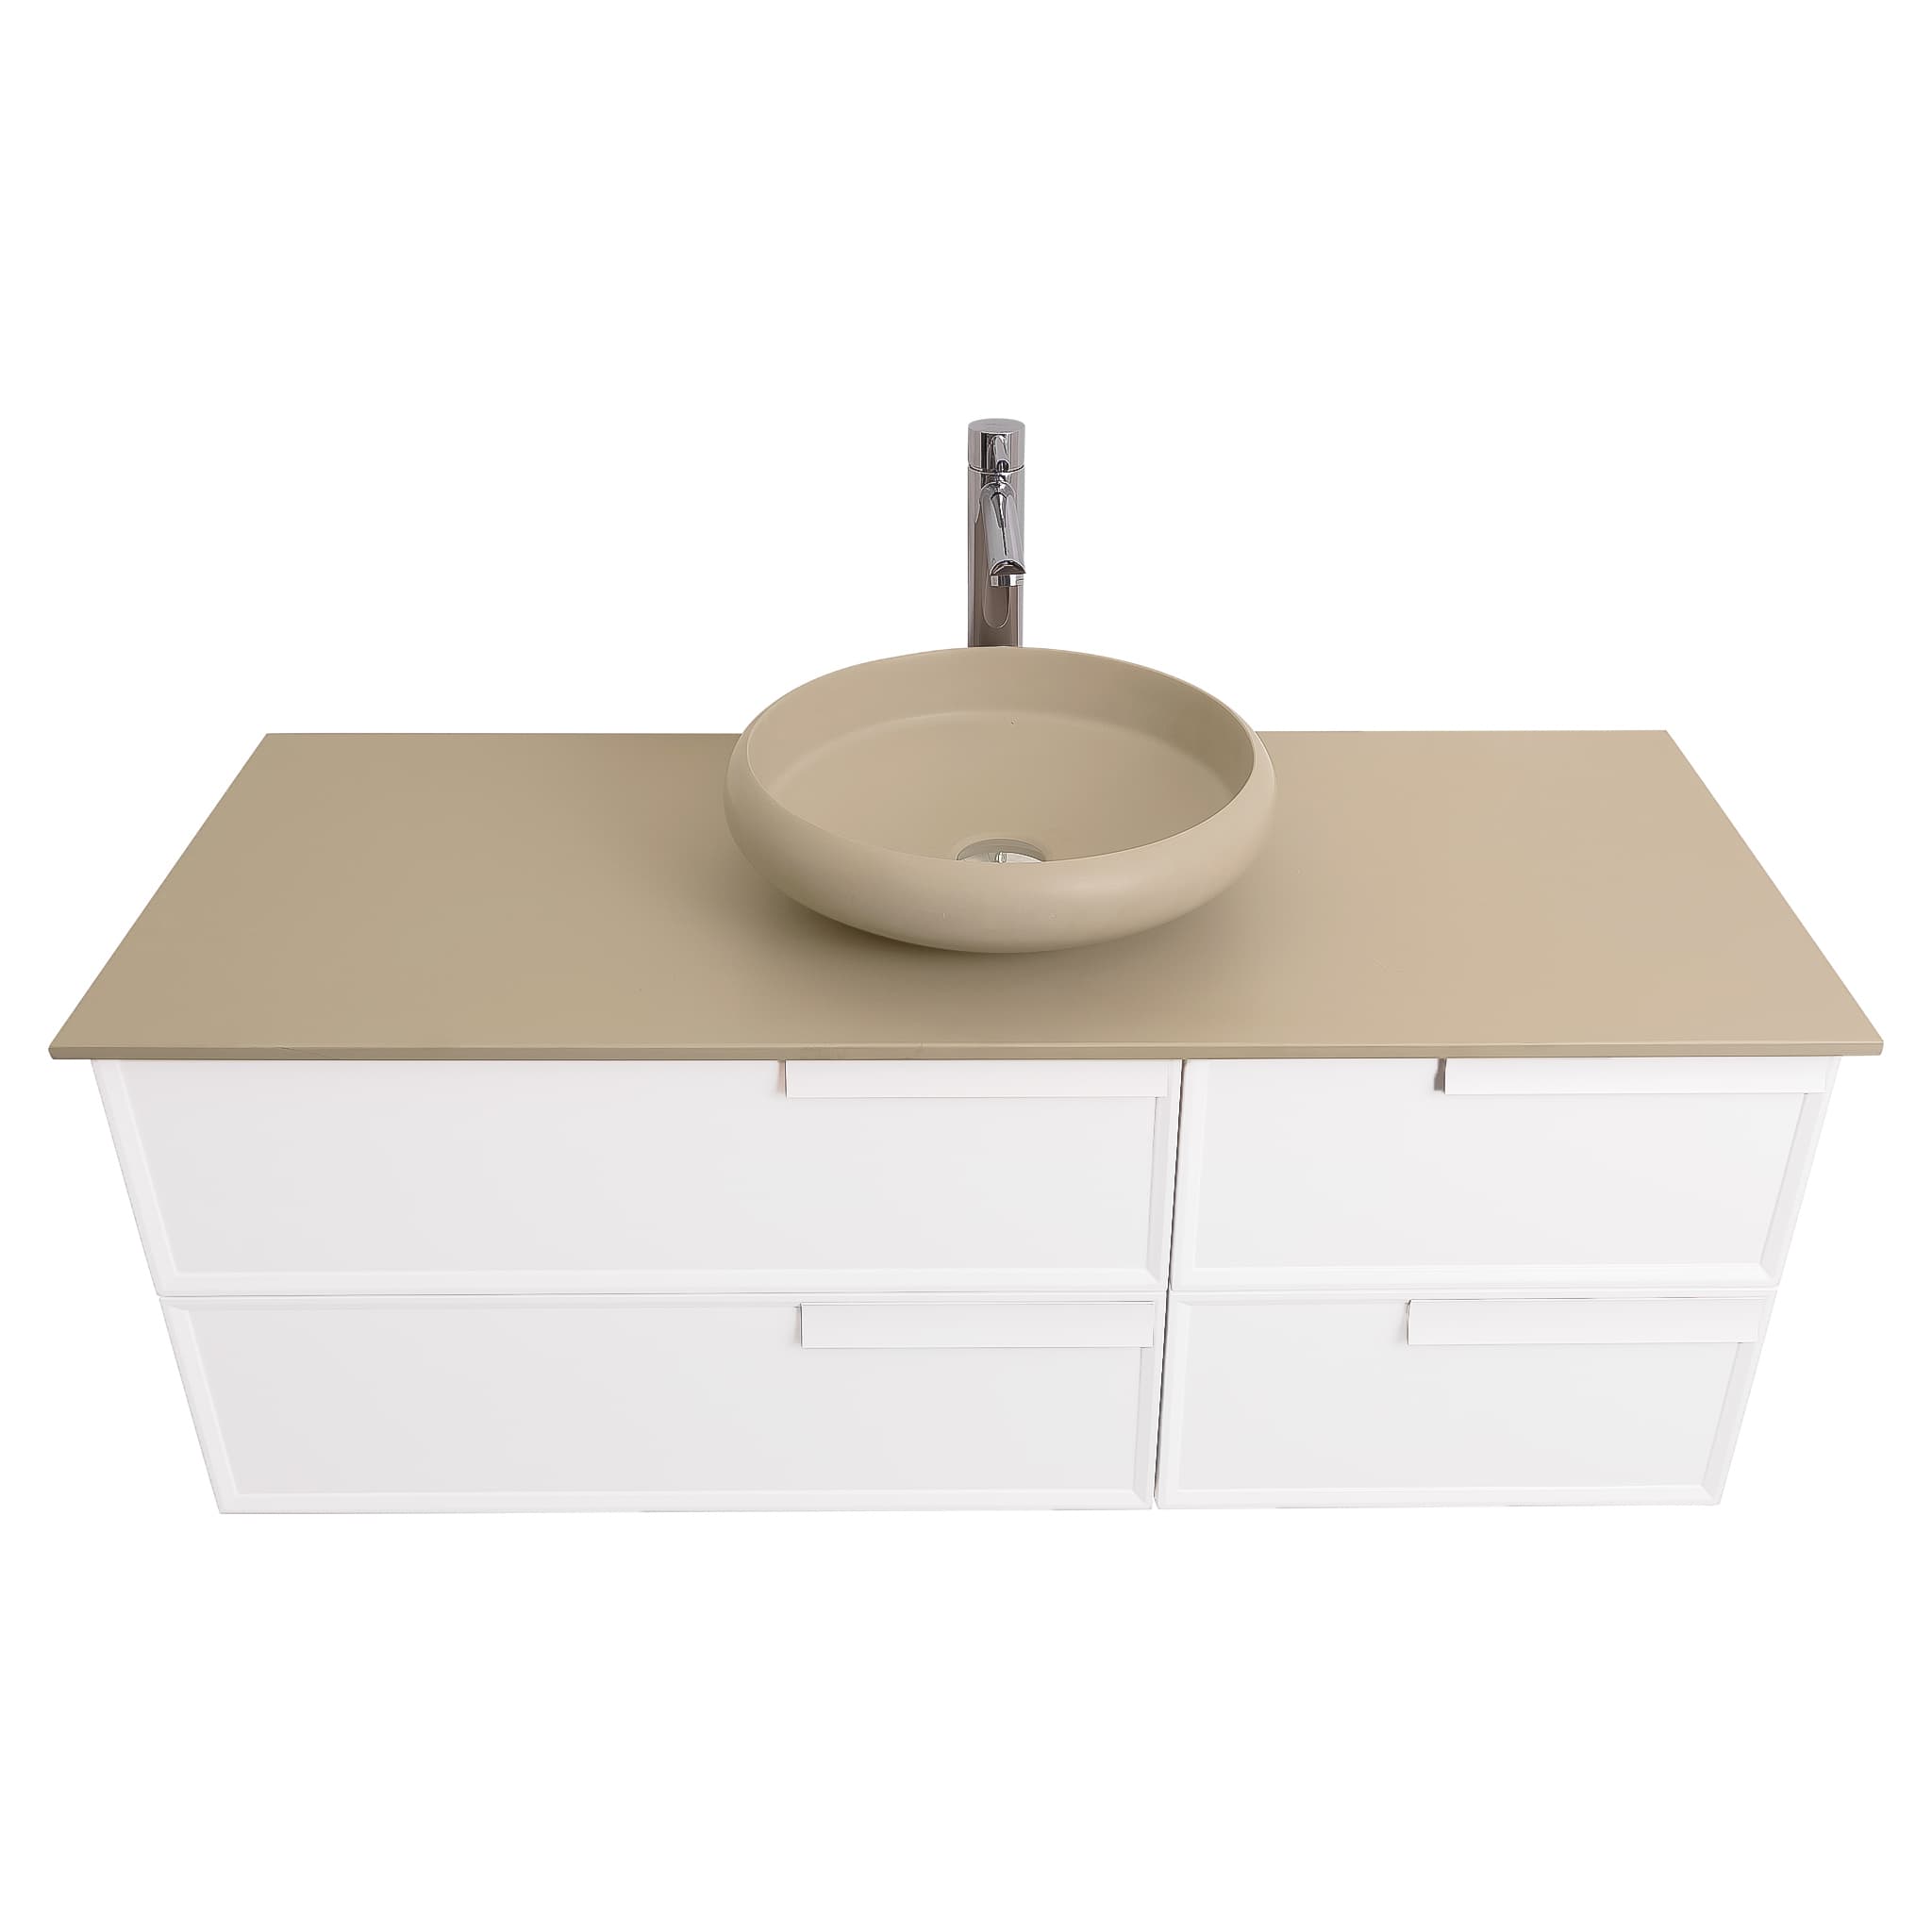 Garda 47.5 Matte White Cabinet, Solid Surface Flat Taupe Counter and Round Solid Surface Taupe Basin 1153, Wall Mounted Modern Vanity Set